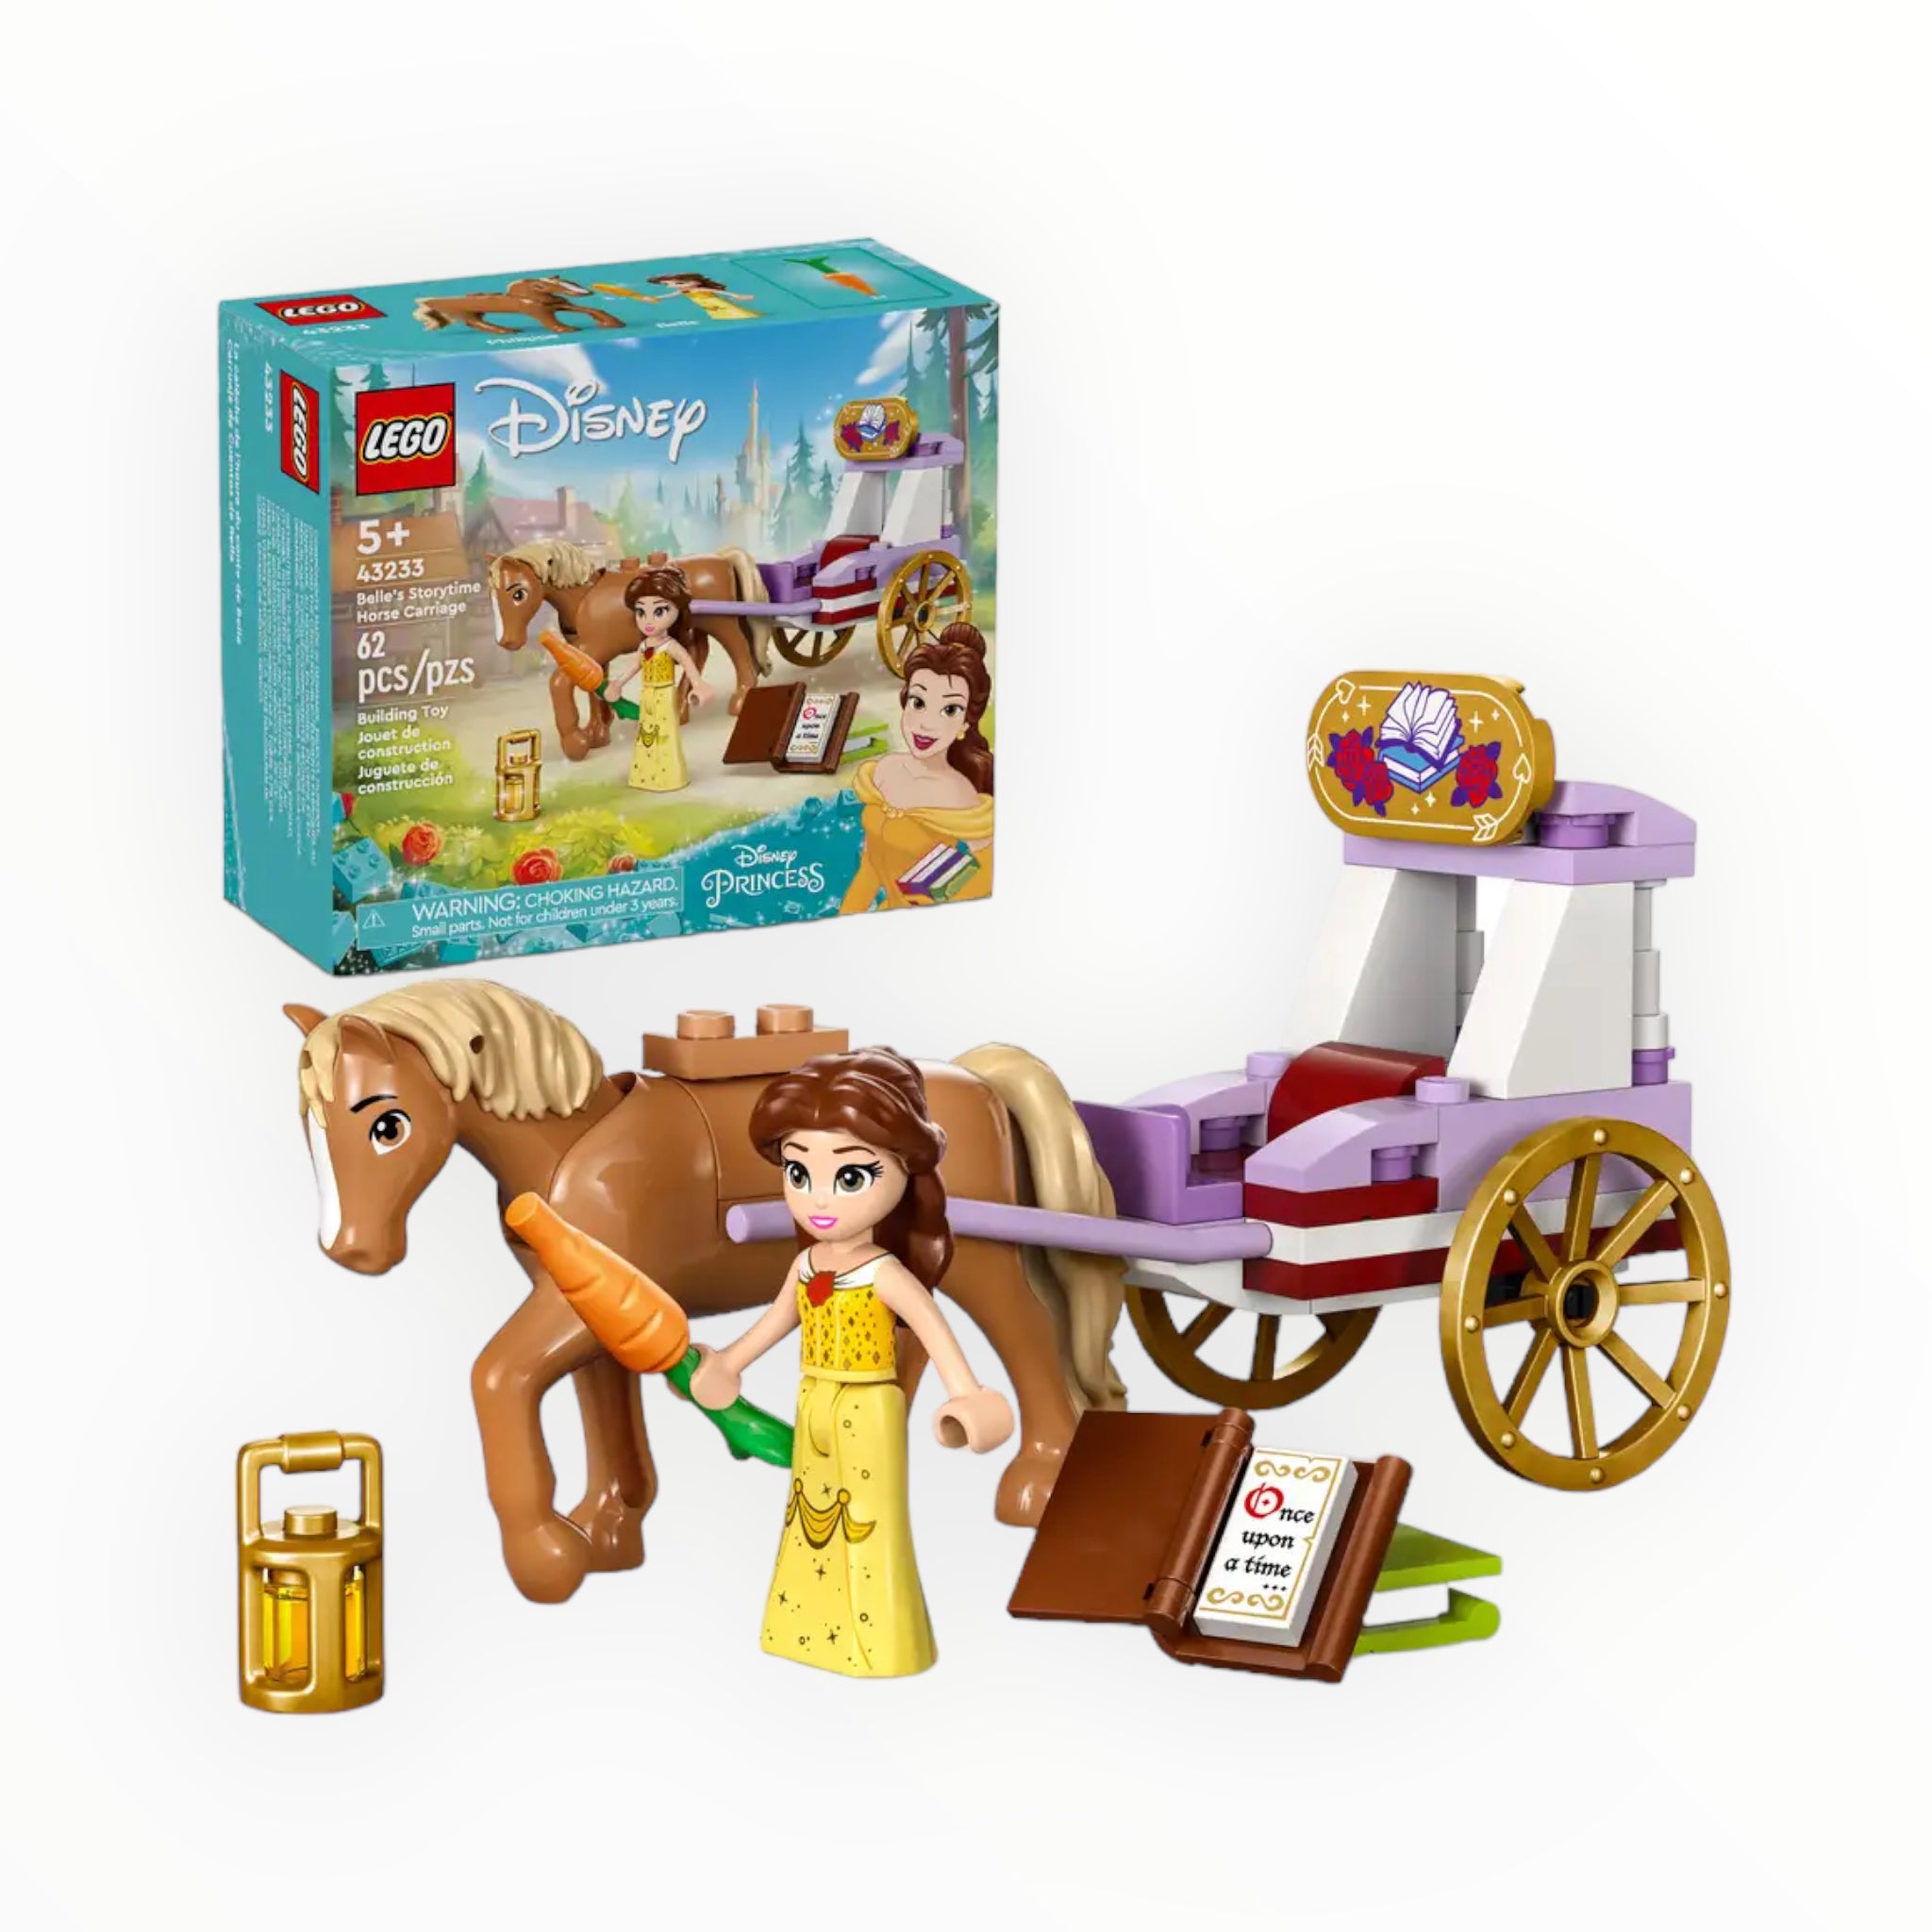 43233 Disney Belle’s Storytime Horse Carriage